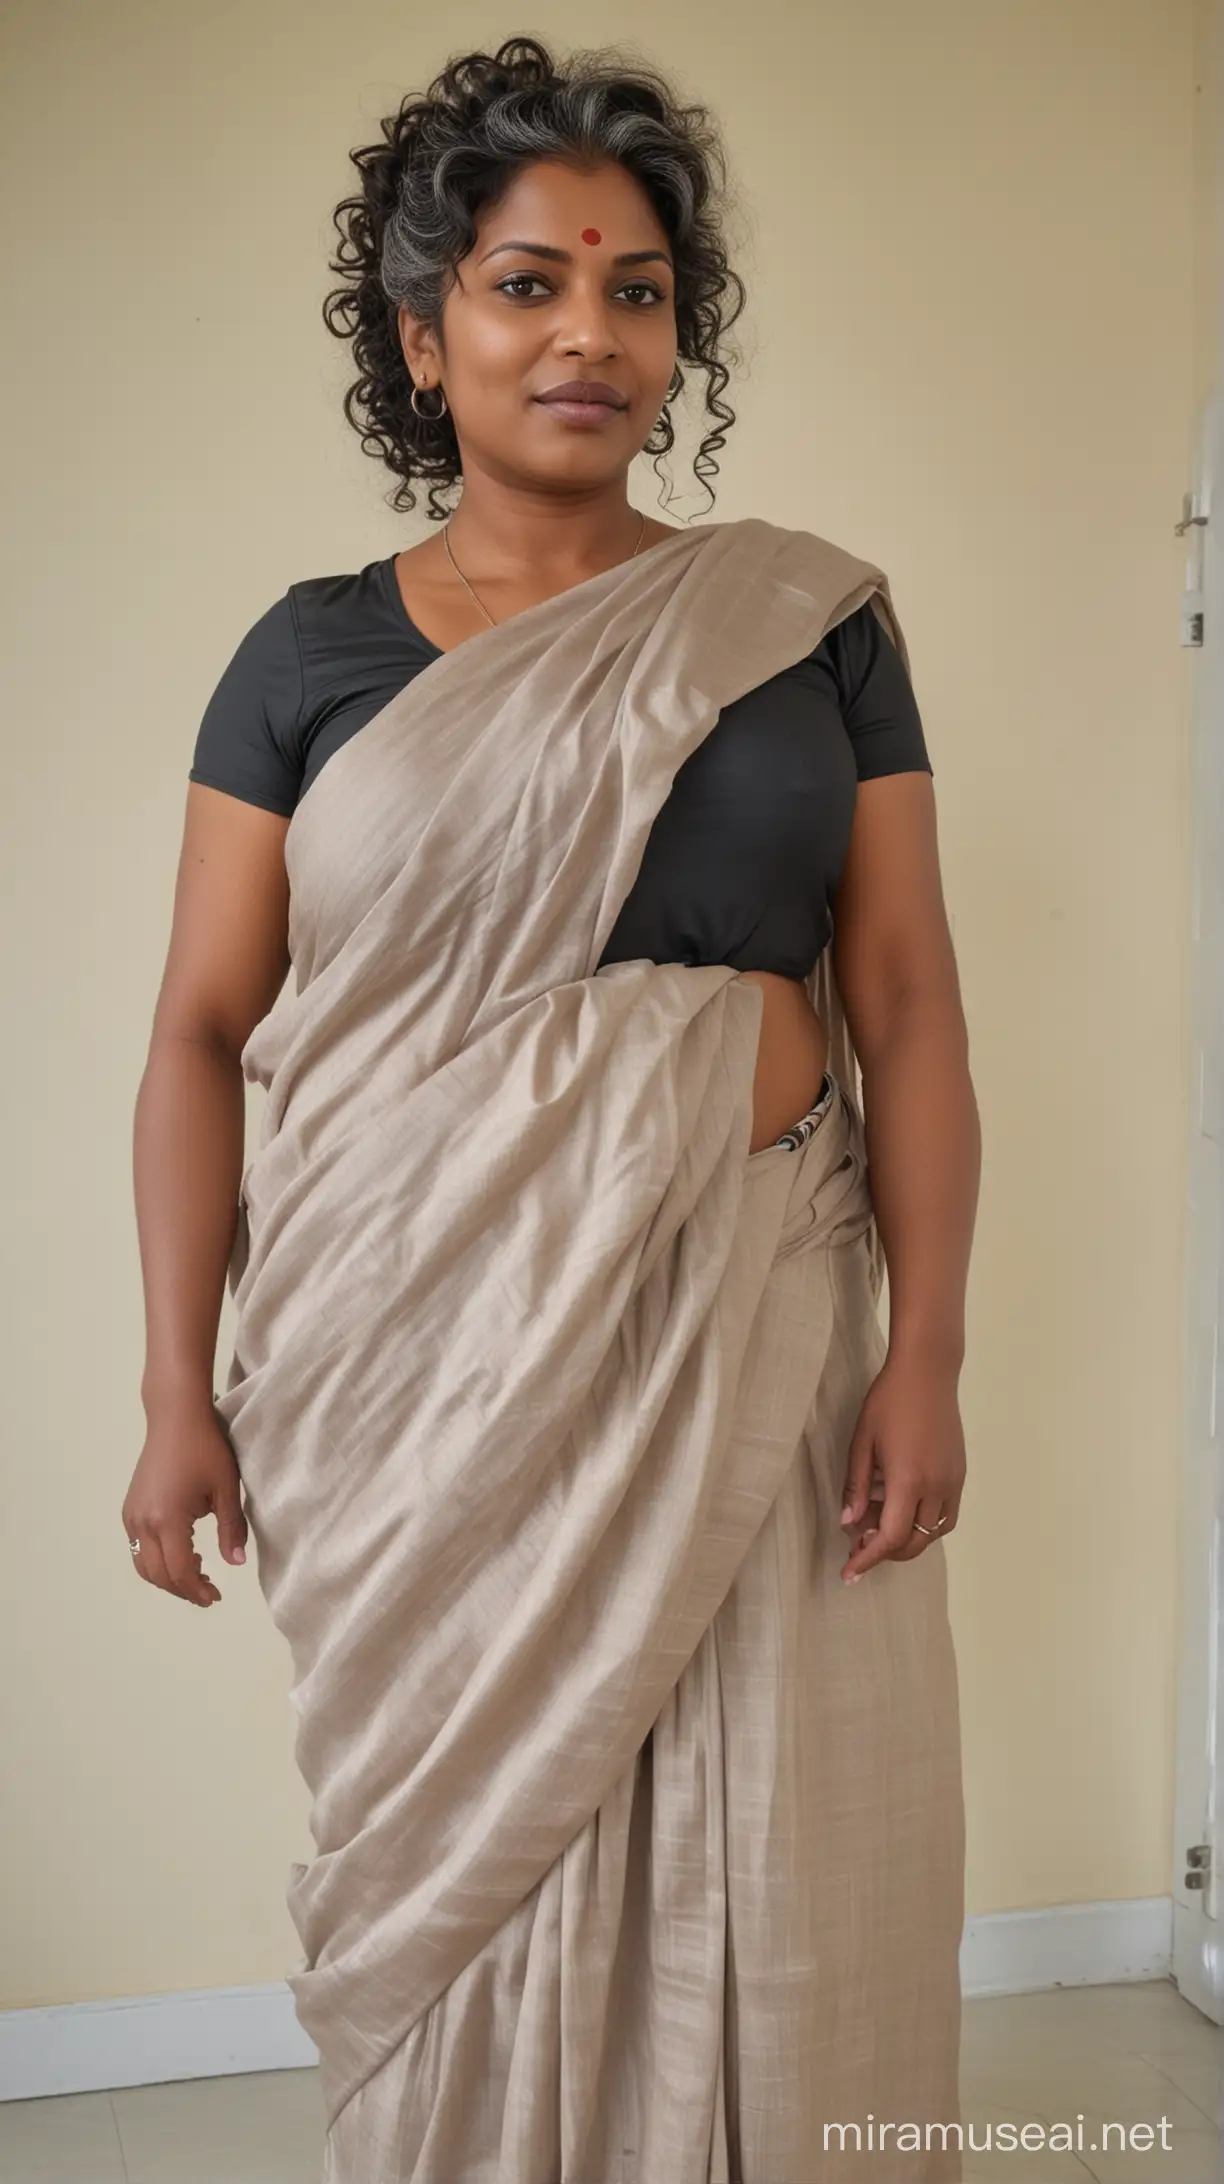 A 53 year old black fat woman with small eyes, small nose, wide lips, weak chin and long curly grey hair with a bun at the back wearing a saree who is 8 months pregnant and standing in the doctor's clinic with her large belly